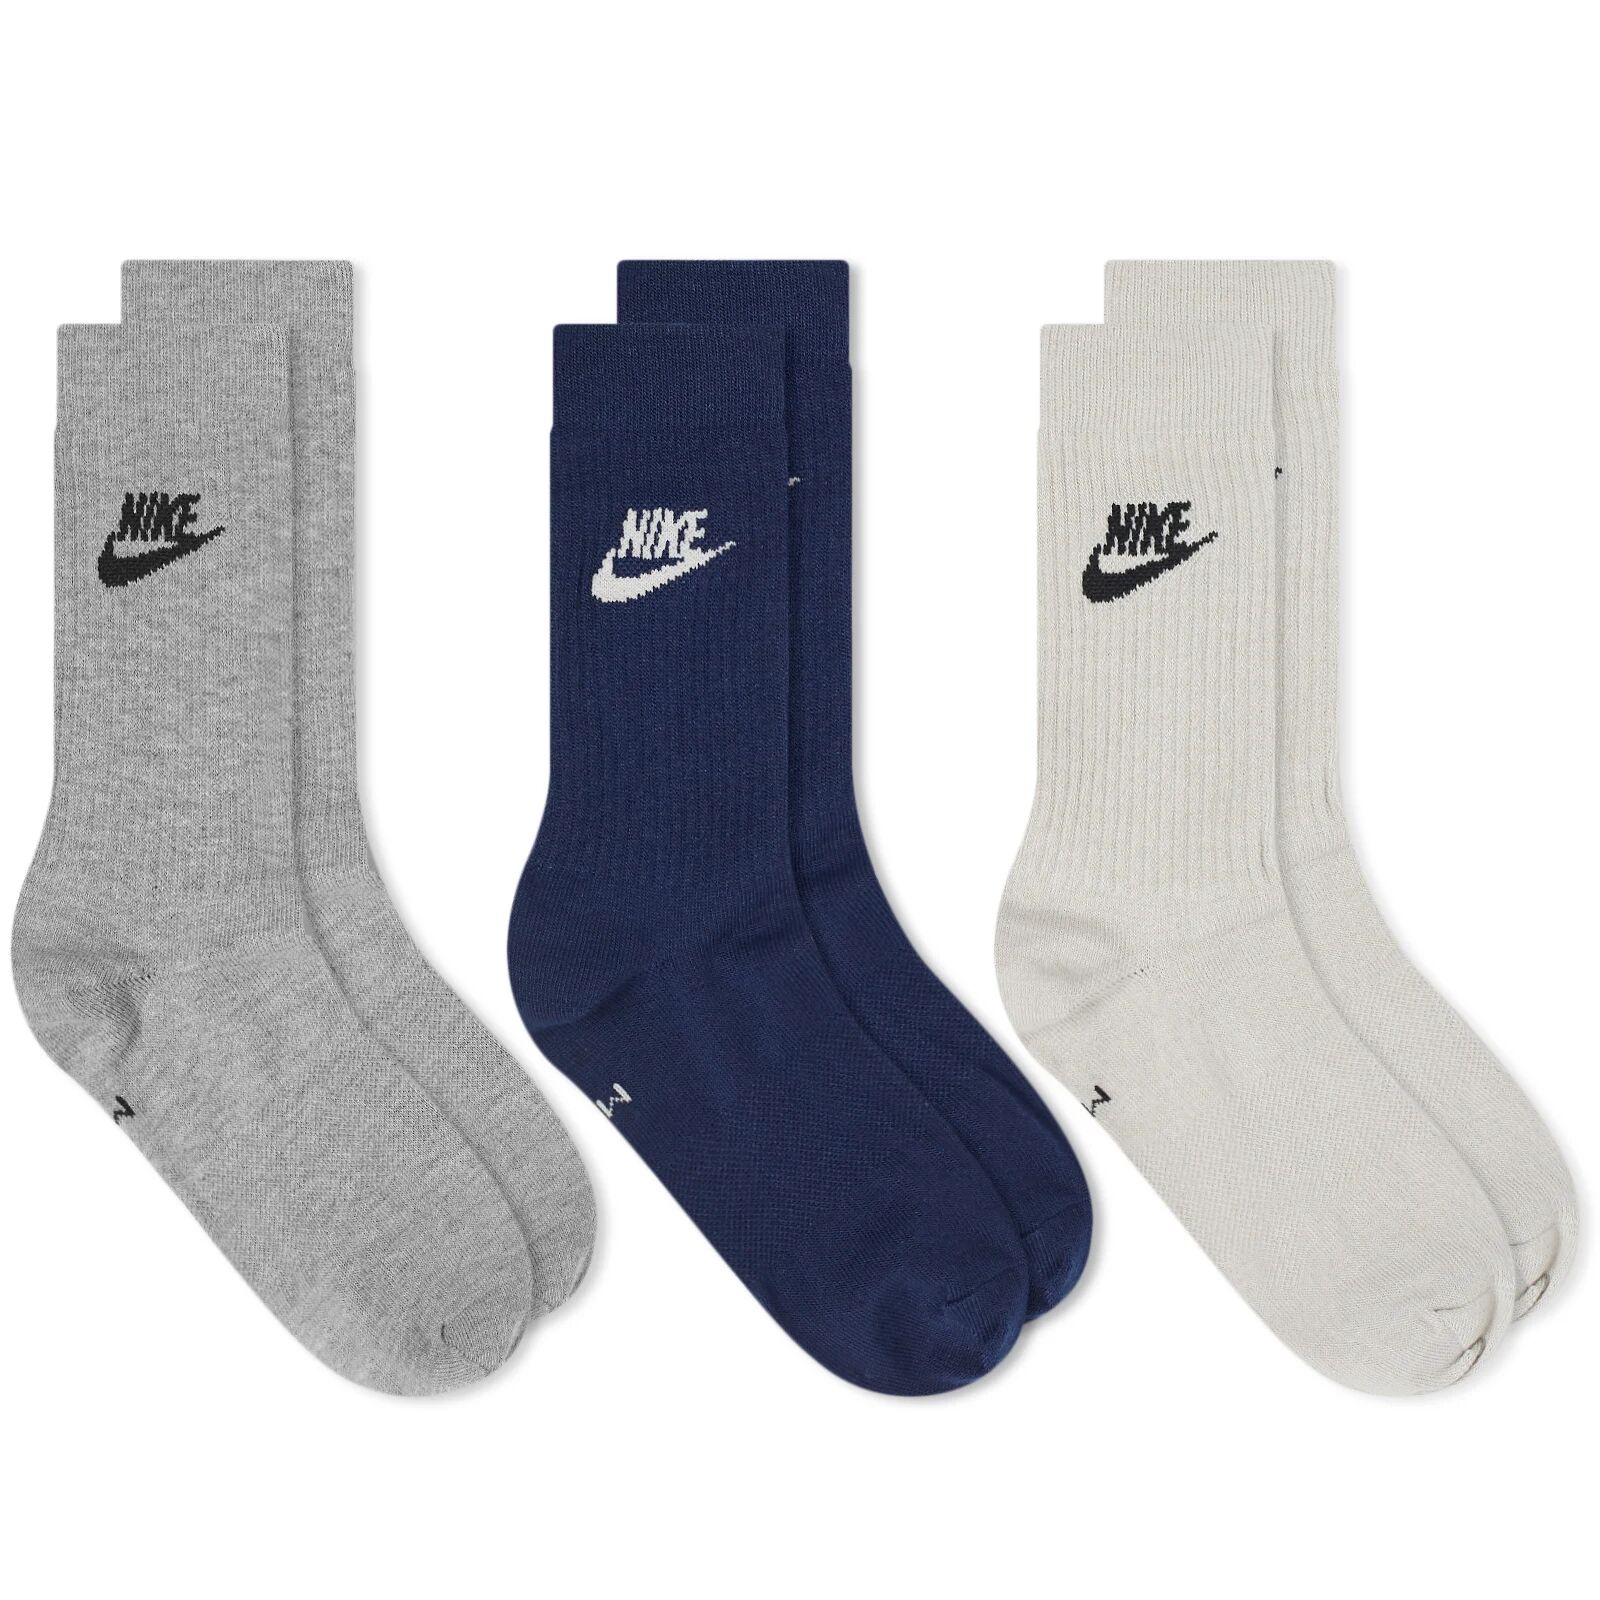 Nike Men's Everyday Essential Sock - 3 Pack in Multi, Size Large